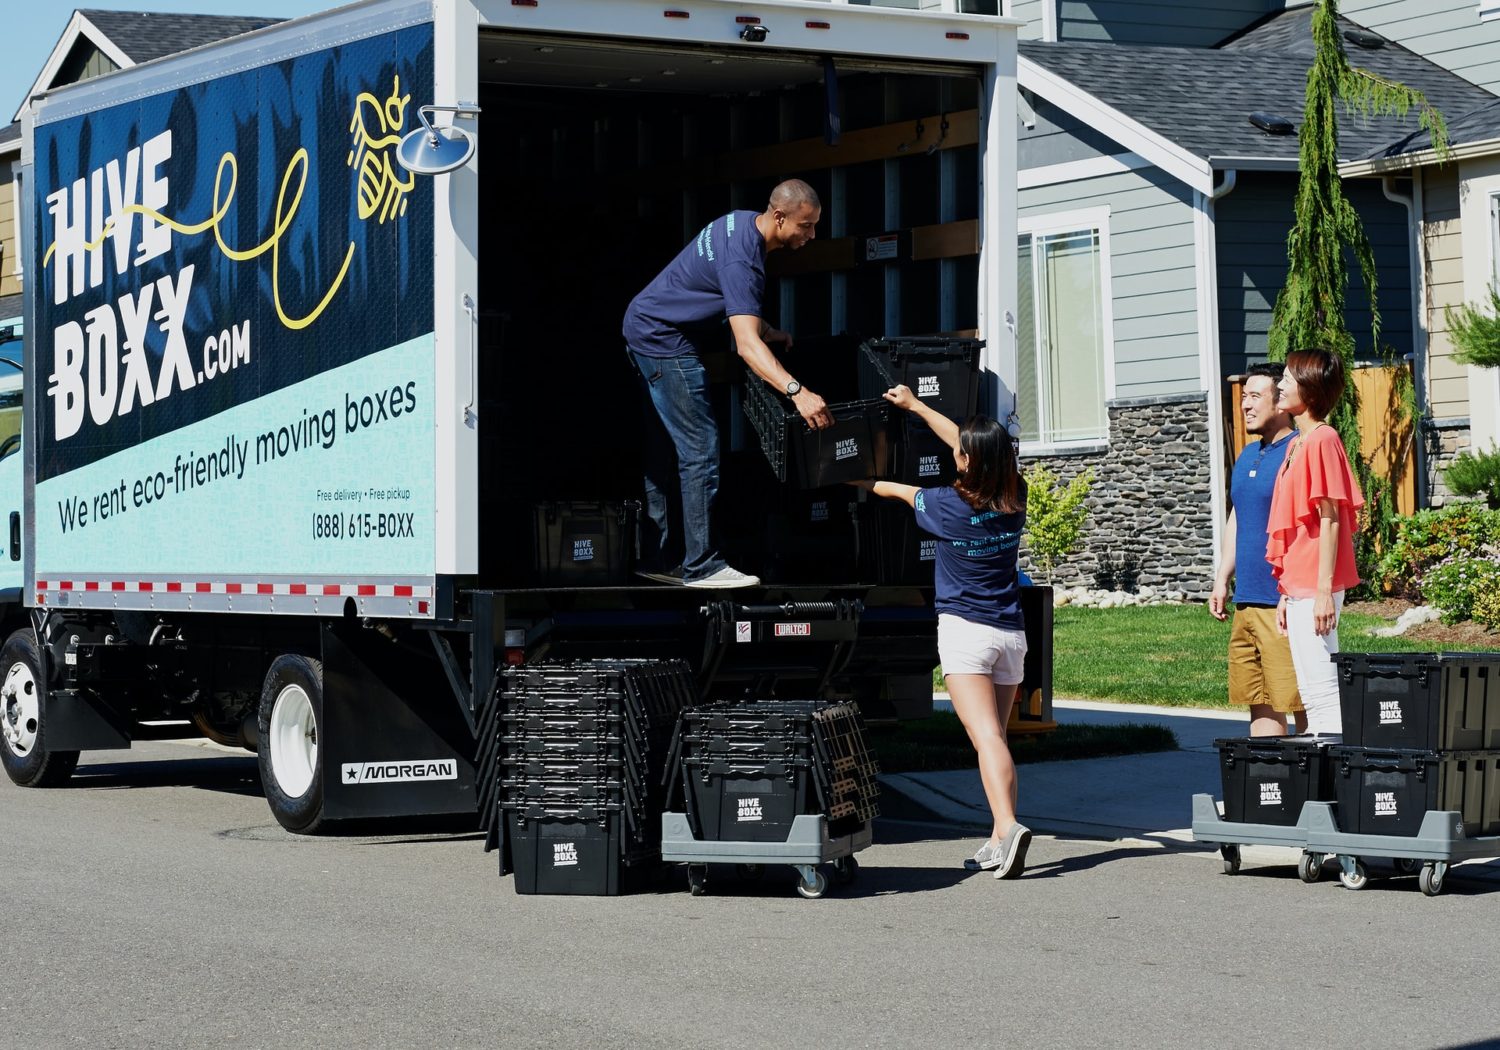 7 Things To Look For In A Reputable Moving Company (And 7 Things To Watch Out For)